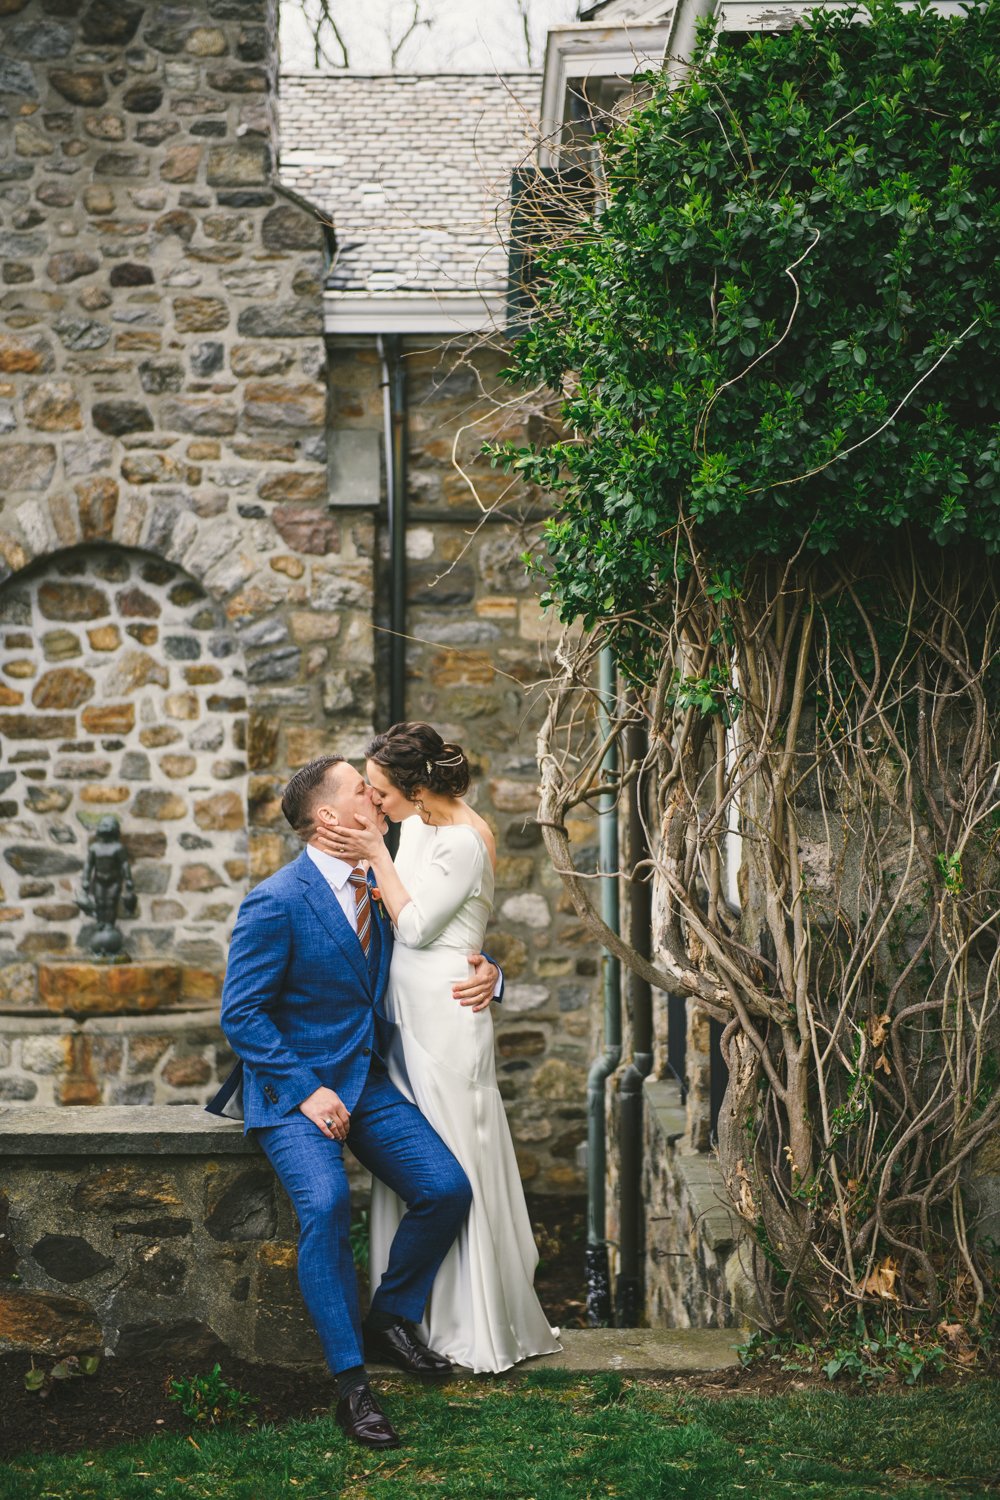 Groom sits on a short stone wall and kisses the bride who is standing next to him.

Upstate New York Wedding Photography. Cold Spring NY Wedding Photography. Luxury Local Wedding Photographer. Destination Wedding Photographer.